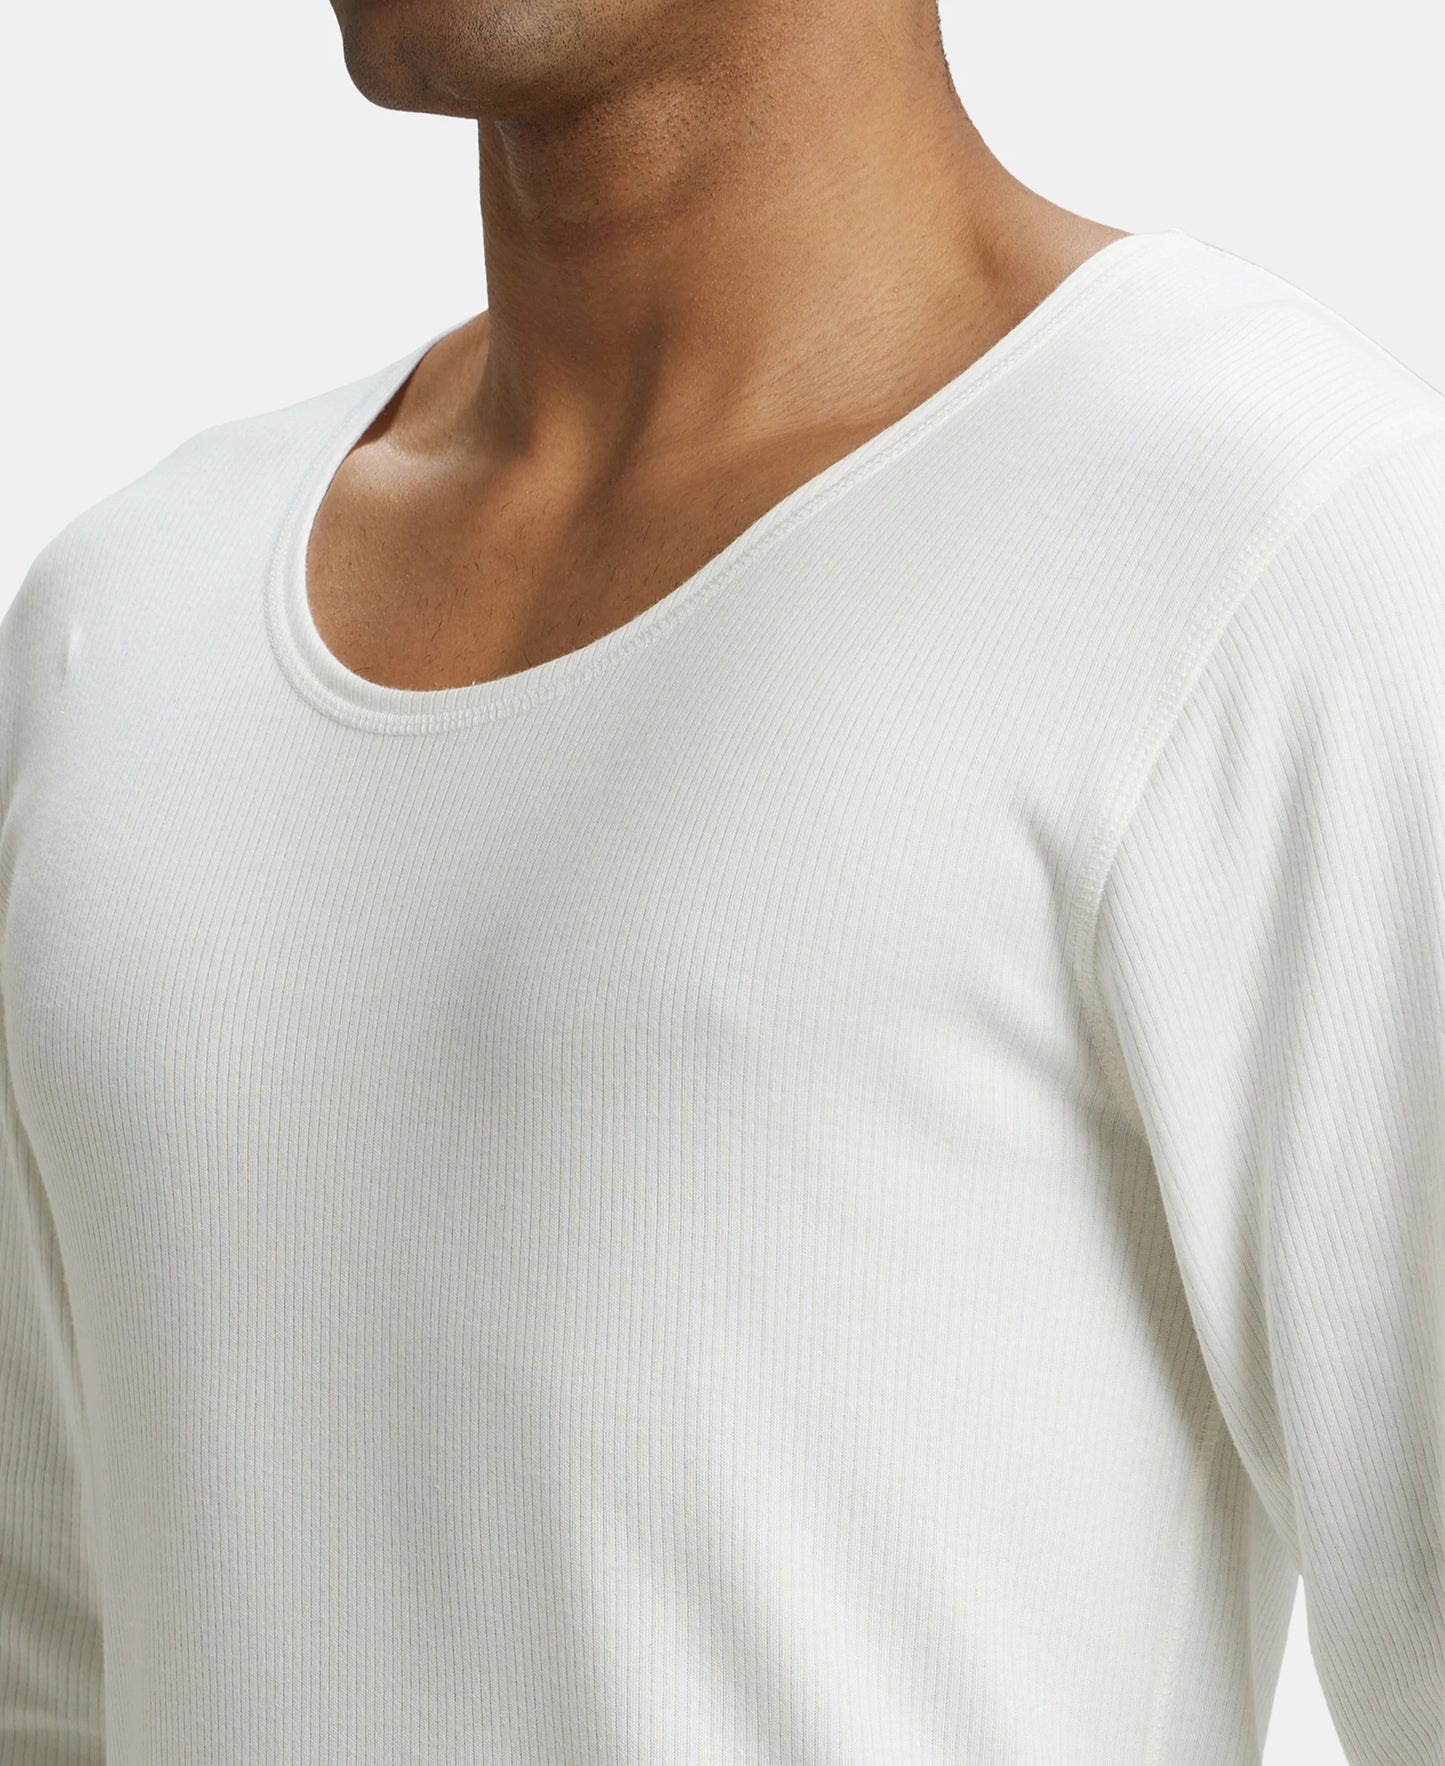 Super Combed Cotton Rich Full Sleeve Thermal Undershirt with StayWarm Technology - Off White-7